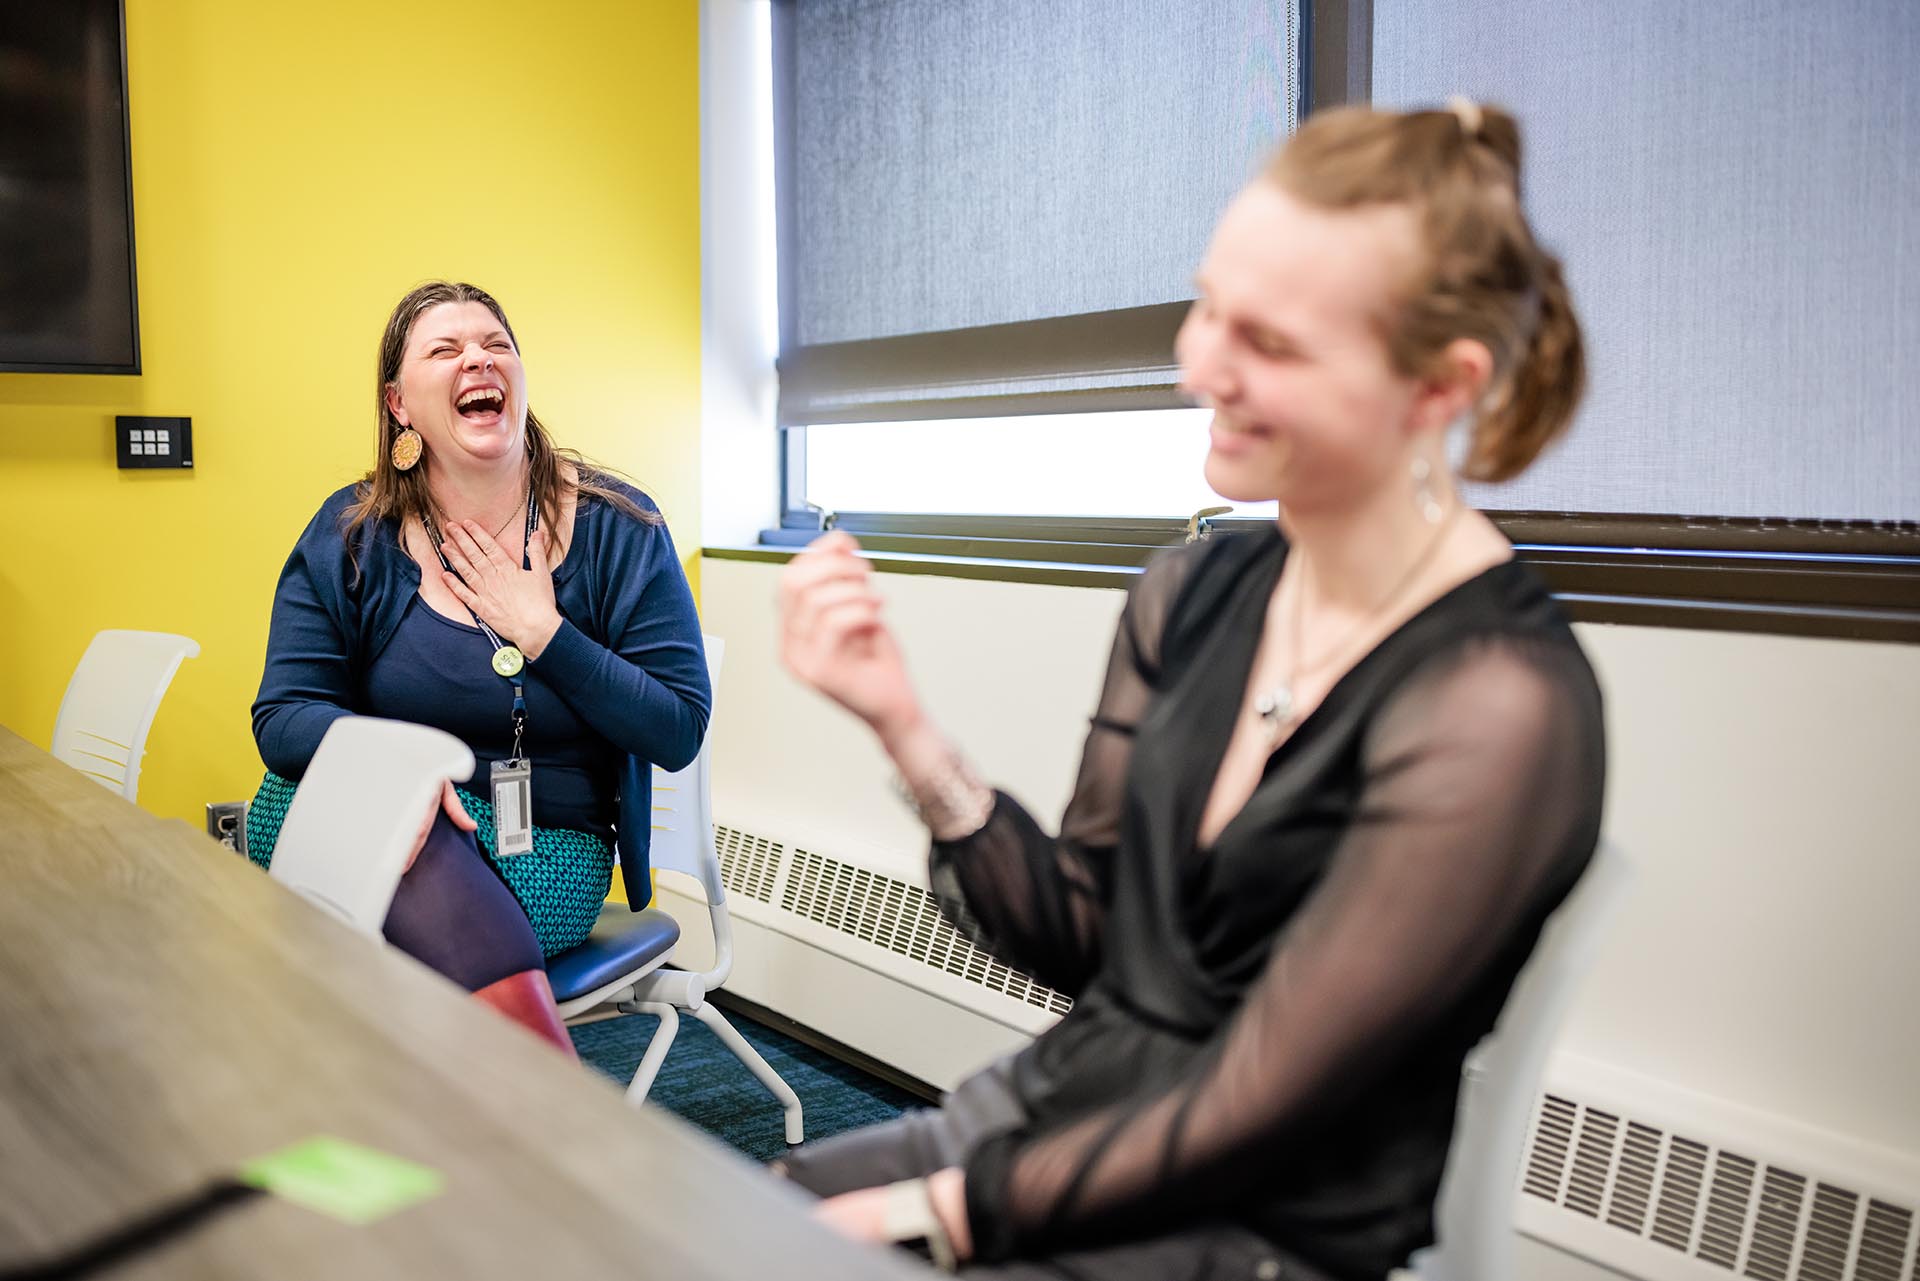 Staff members Traci Hartley, left, and Red Rose work at the Metropolitan State University of Denver’s Department of Speech, Language, Hearing Sciences located in the Central Classroom building